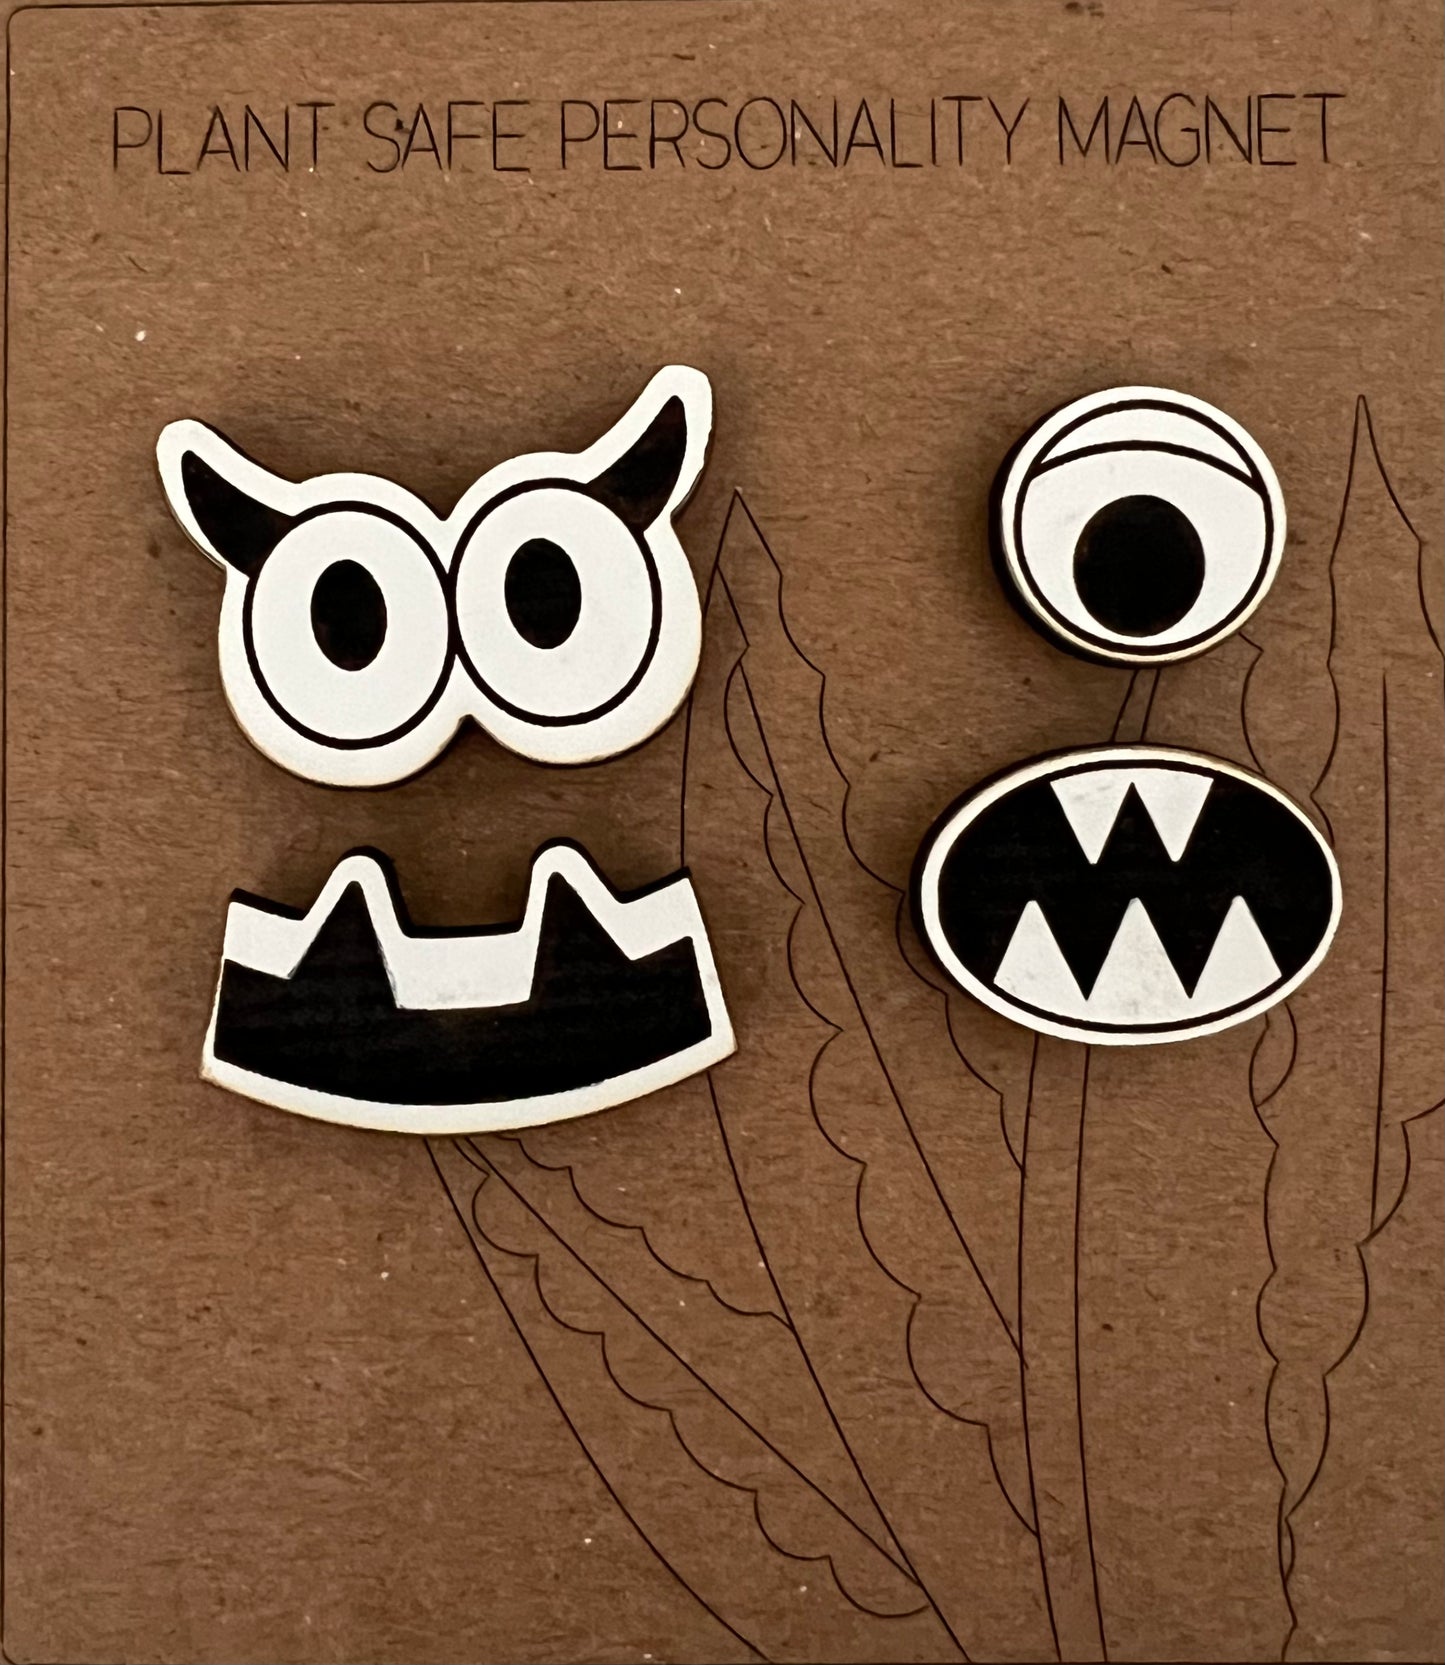 Plant Safe Personality Magnets